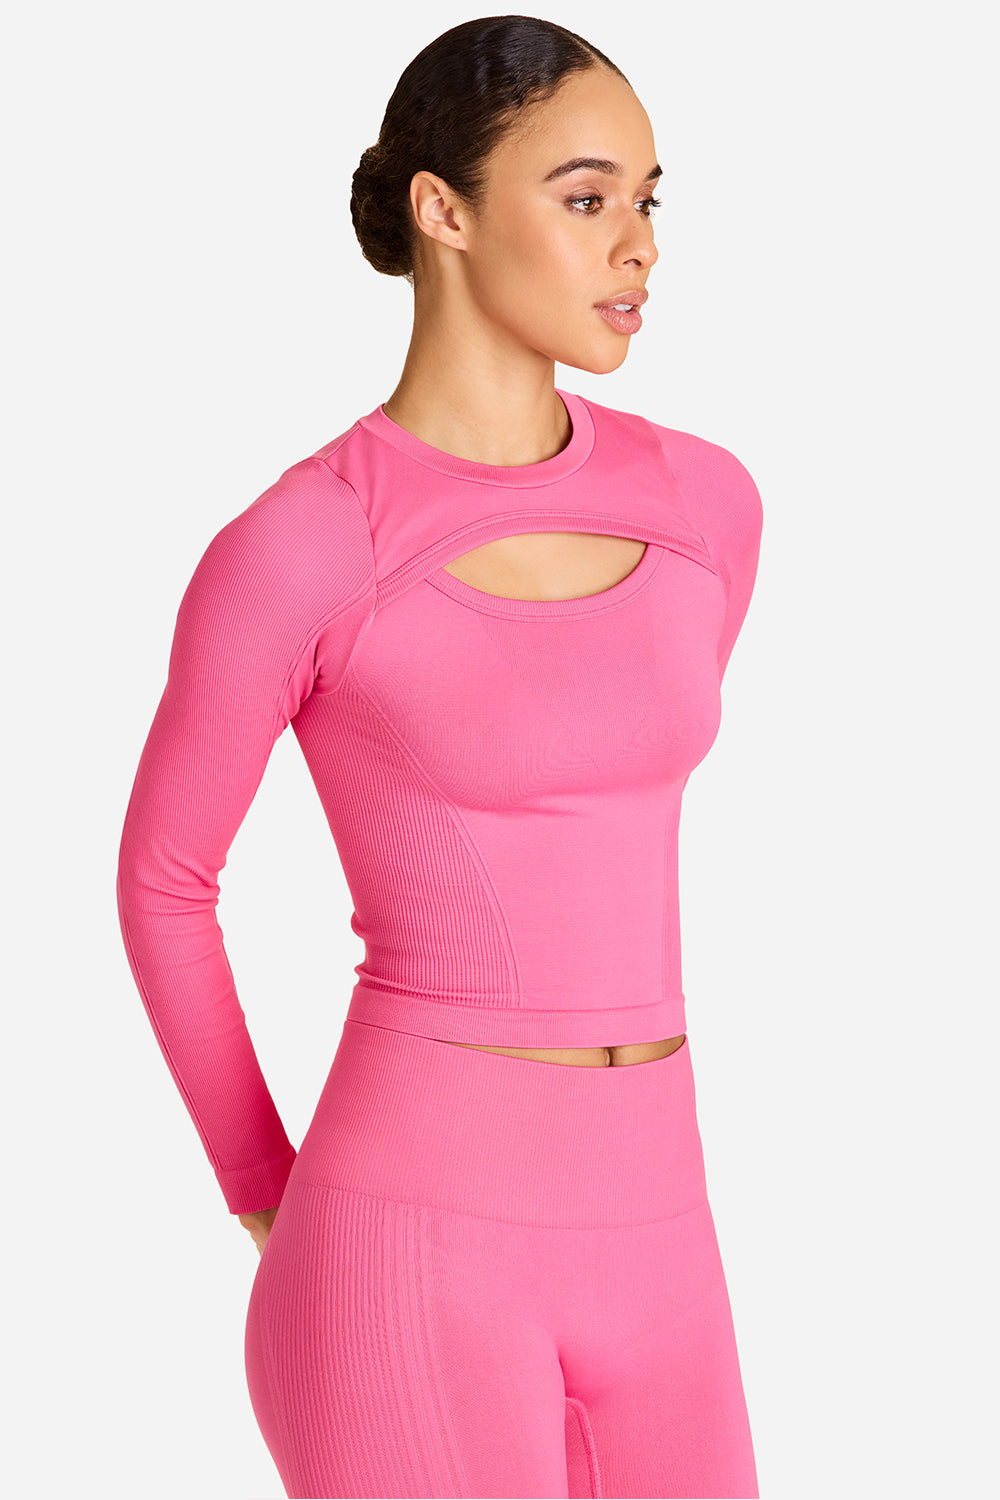 Danskin Now Women's Large Shirt Pink Long Sleeve Poly Stretch Athletic  Workout